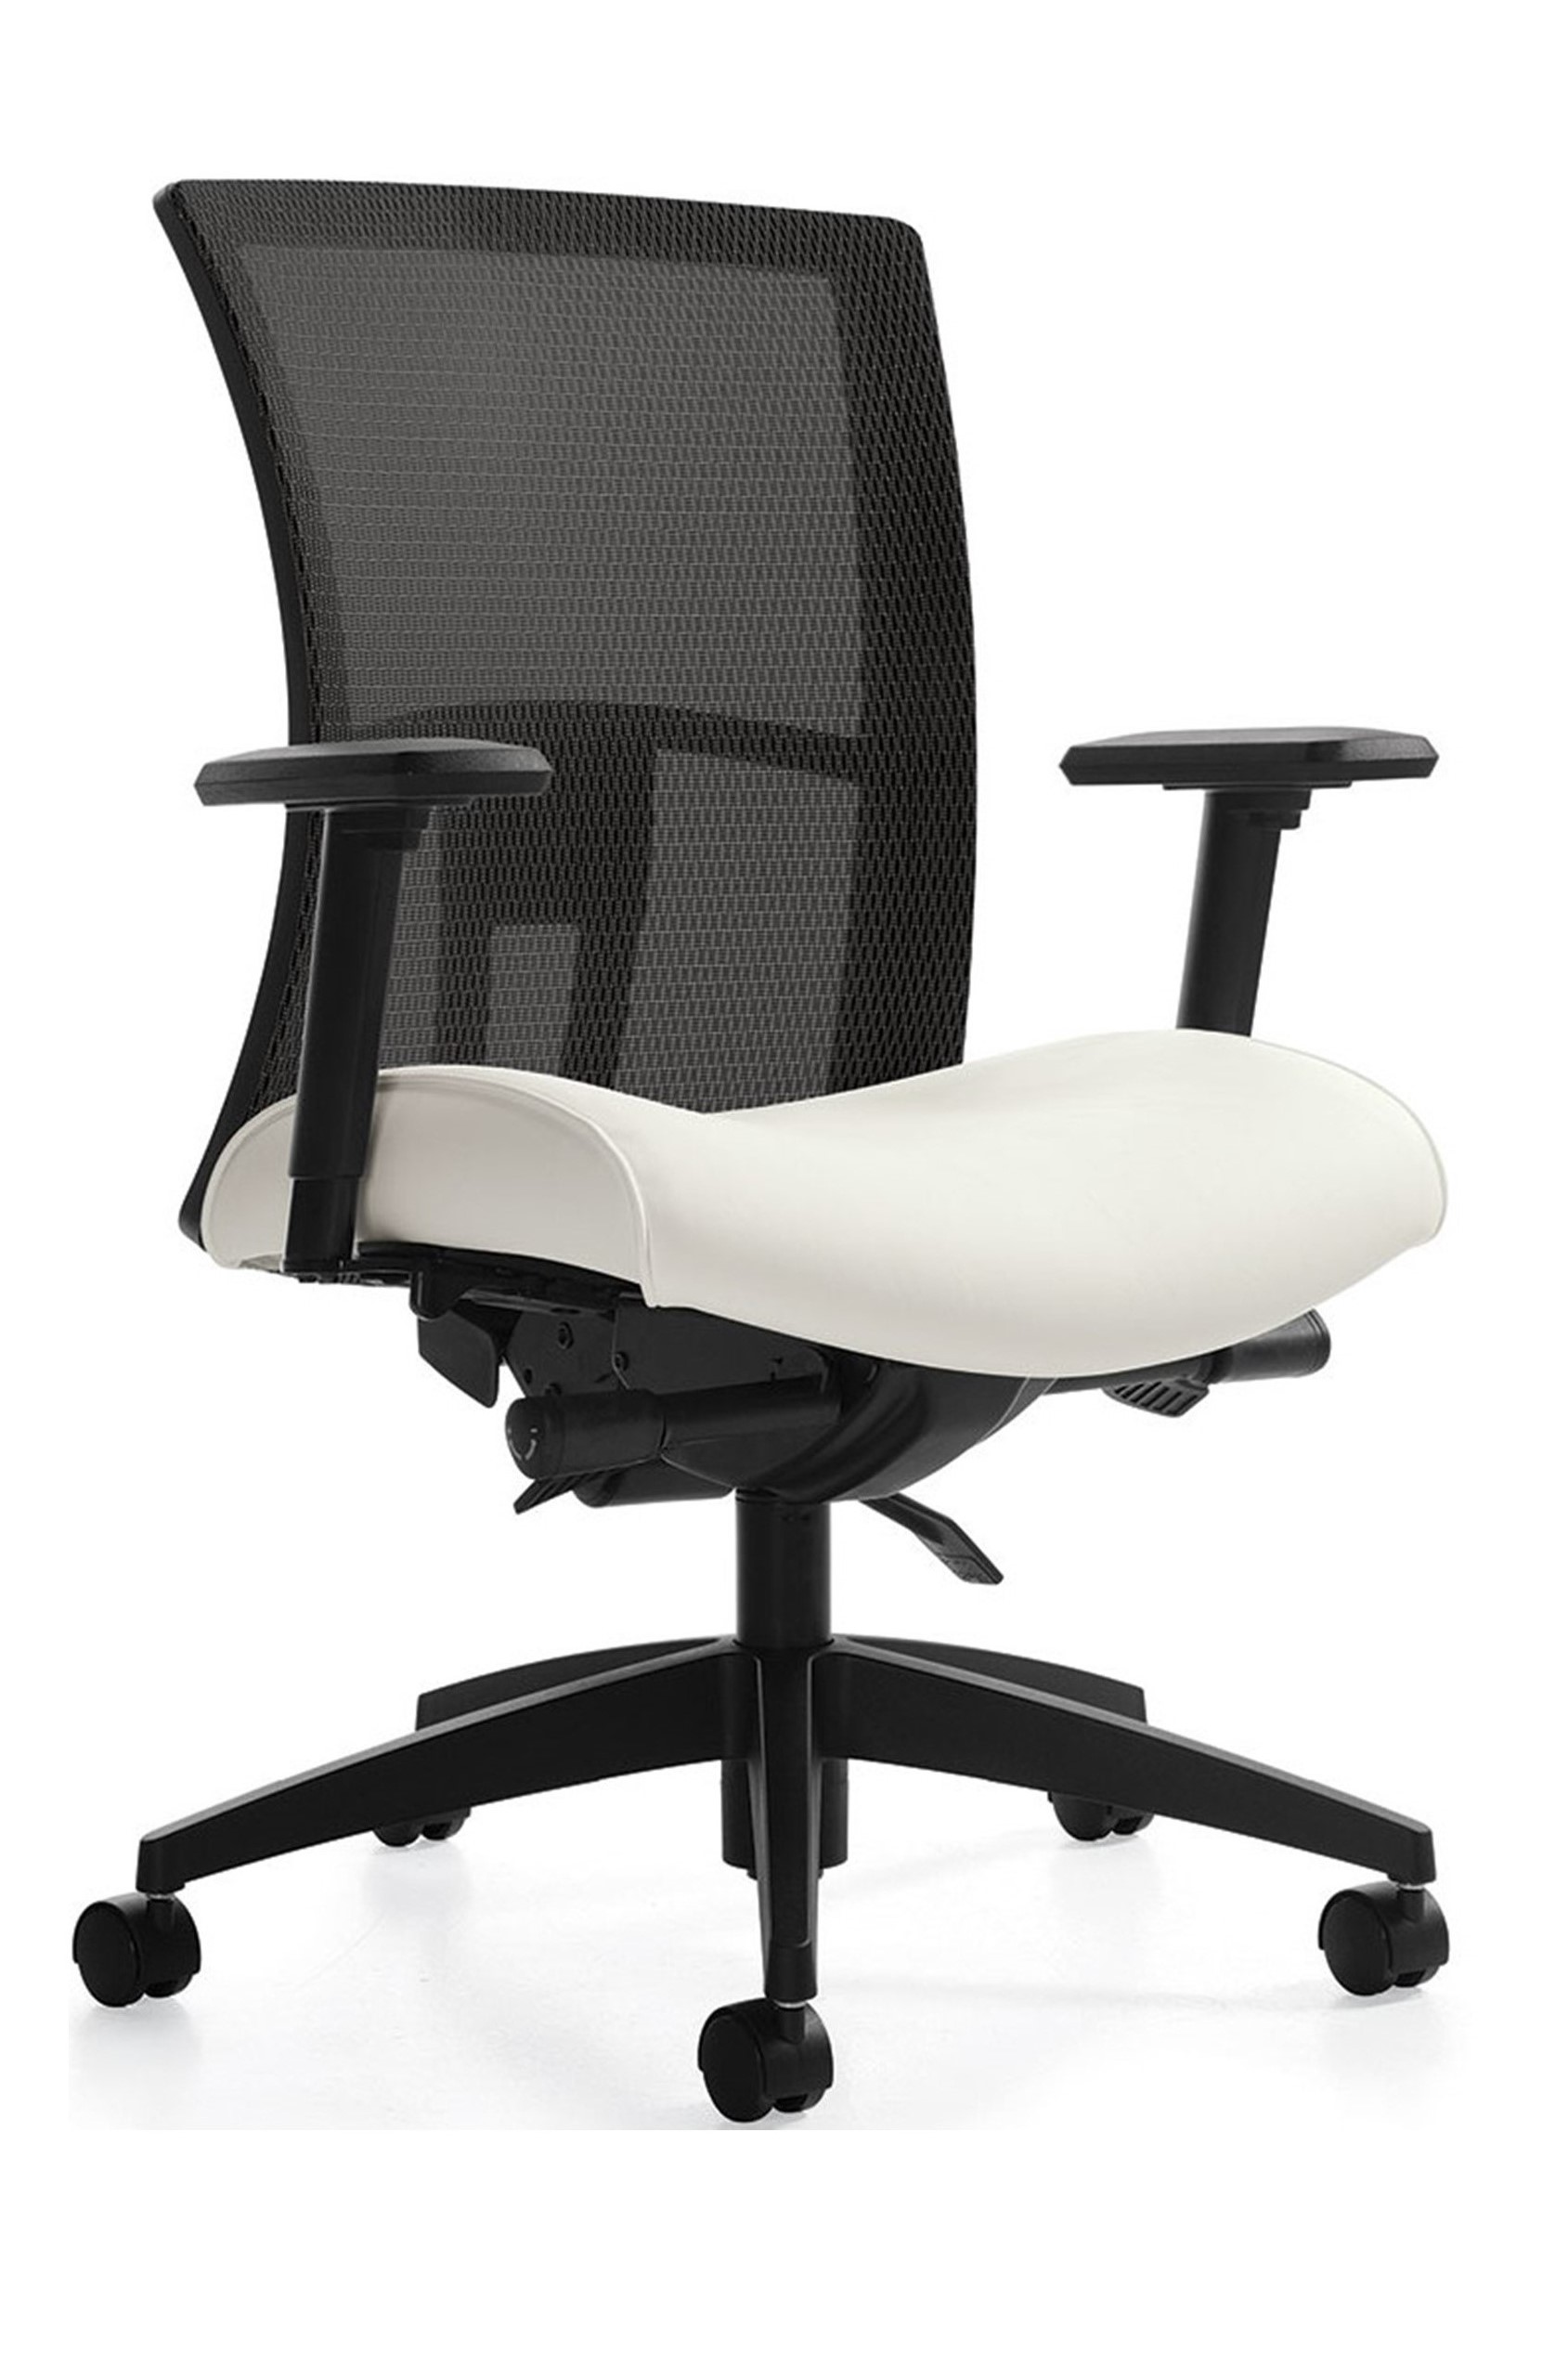 Black mesh medium back synchro tilt task chair with white fabric seat, height & width adjustable arms, sliding seat pan, and 5-star resin reinforced base.